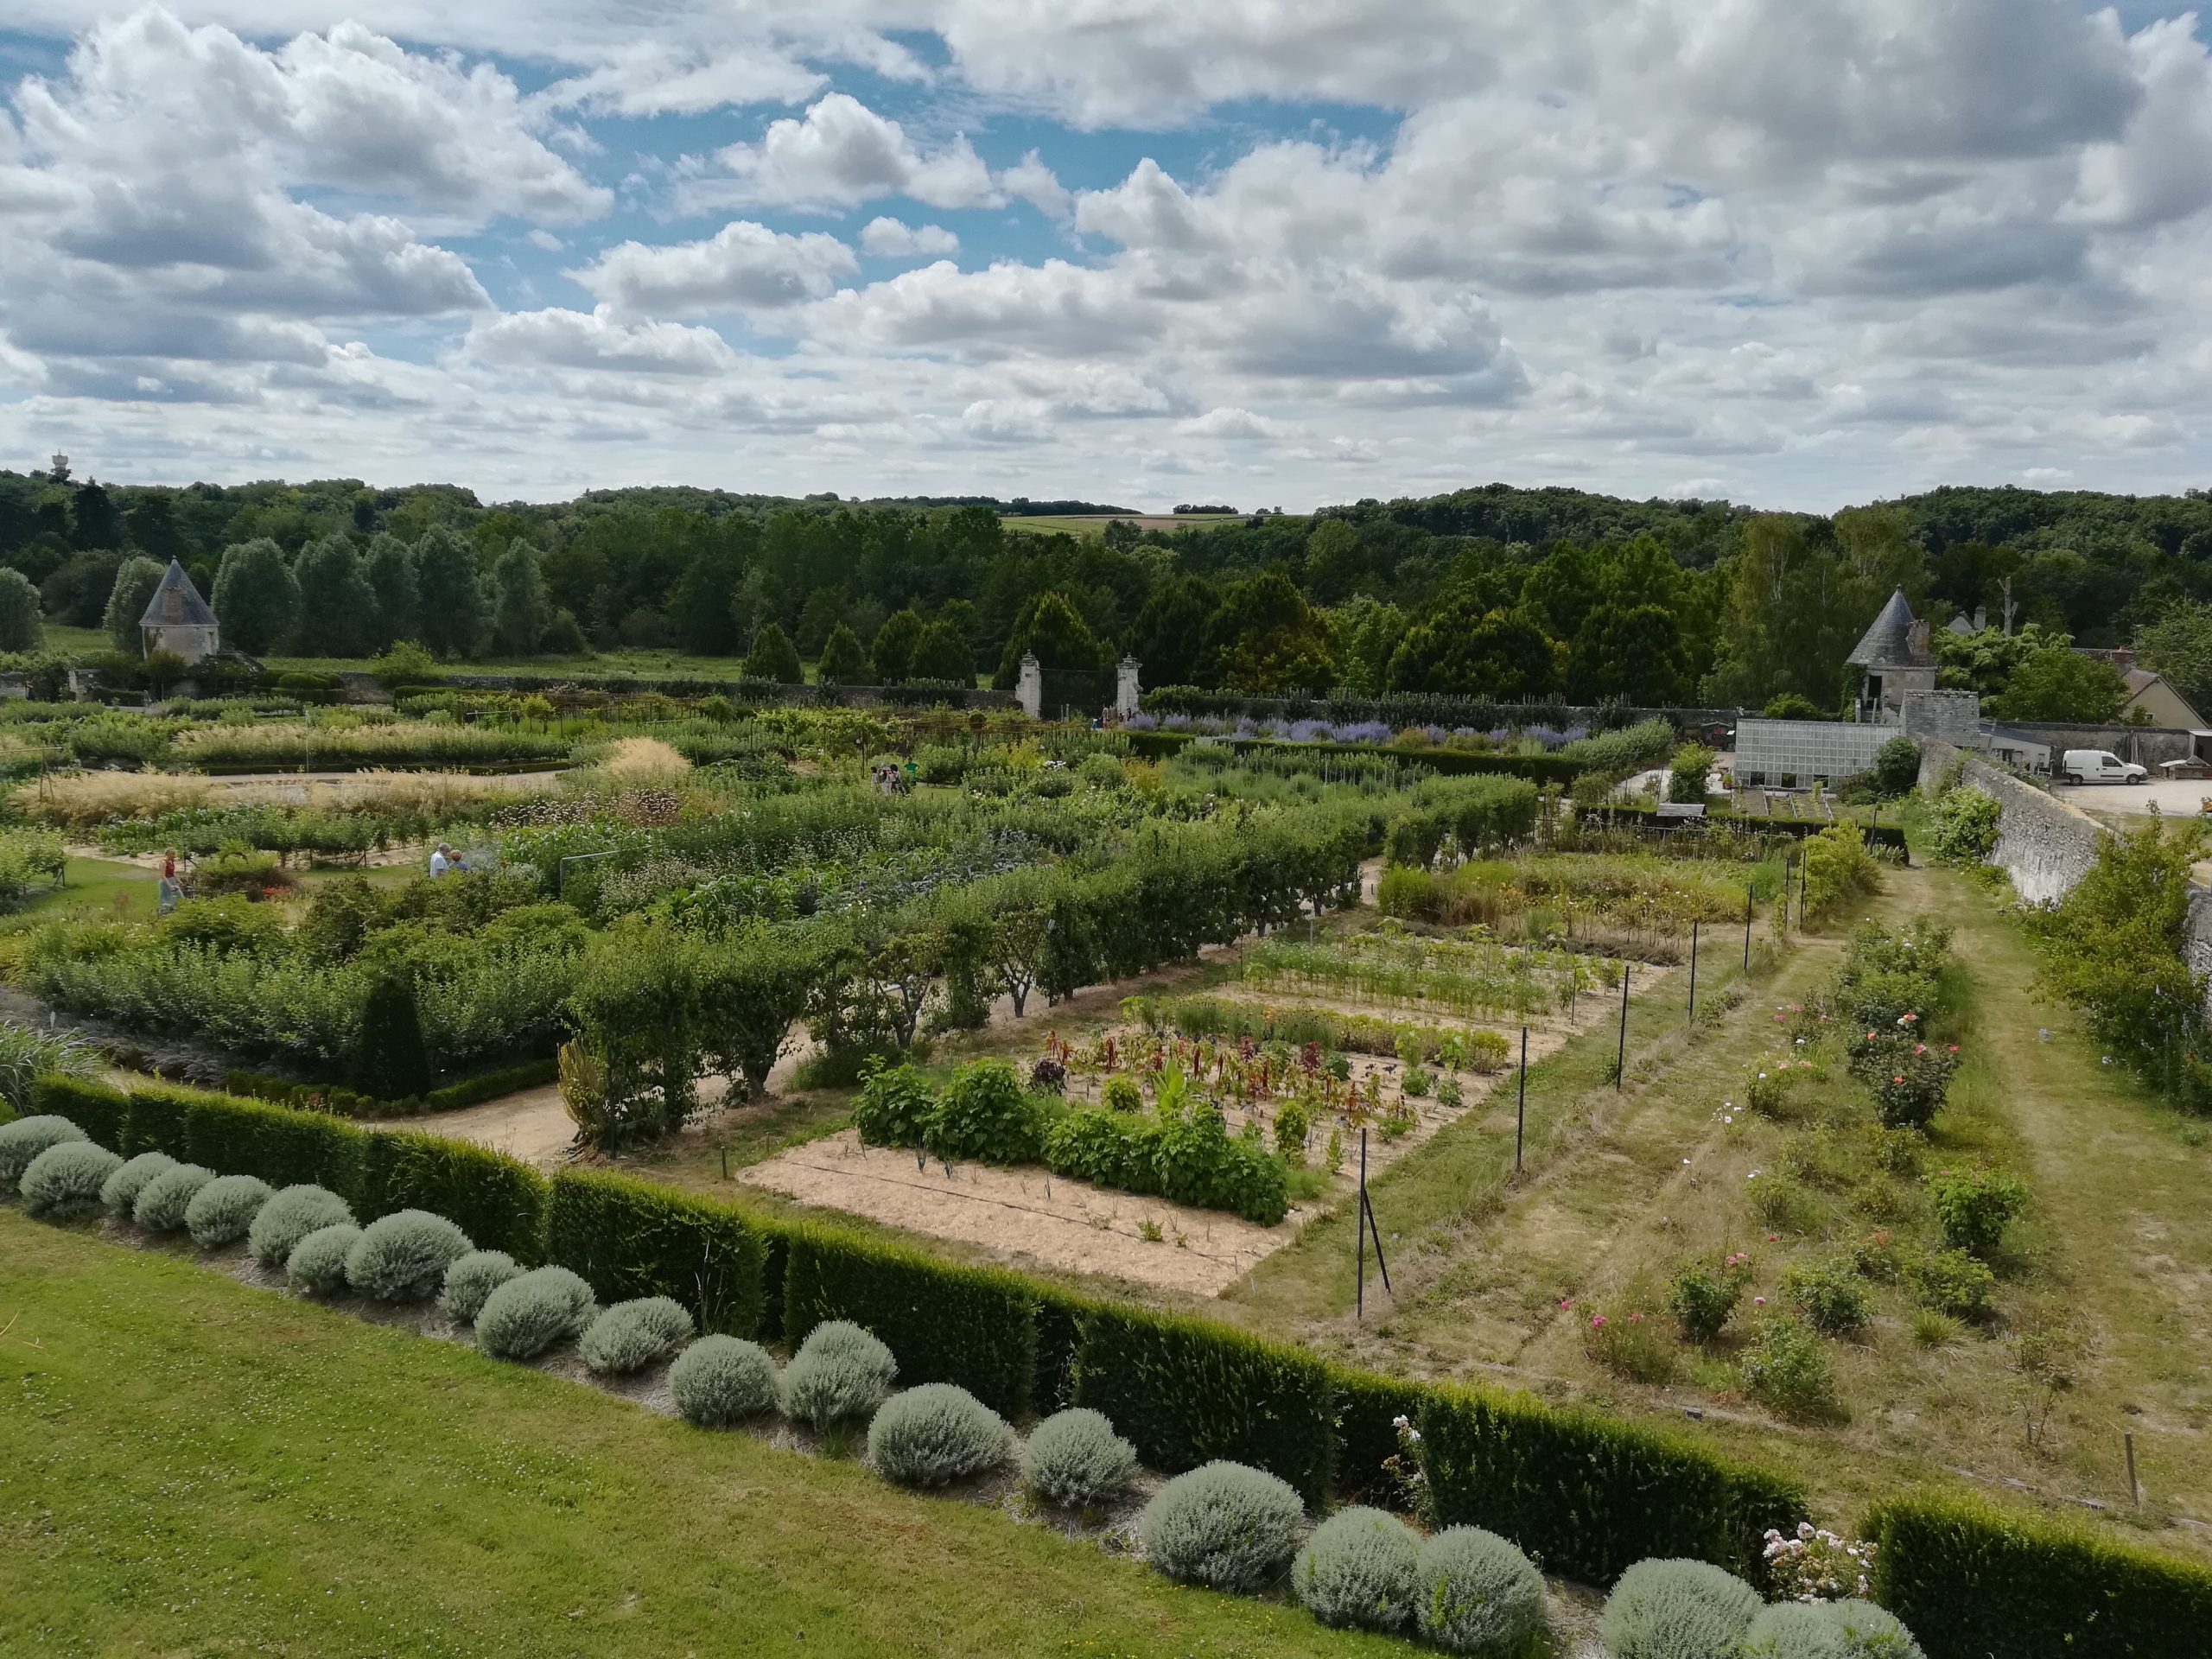 View of the Potager at Chateau de Valmer